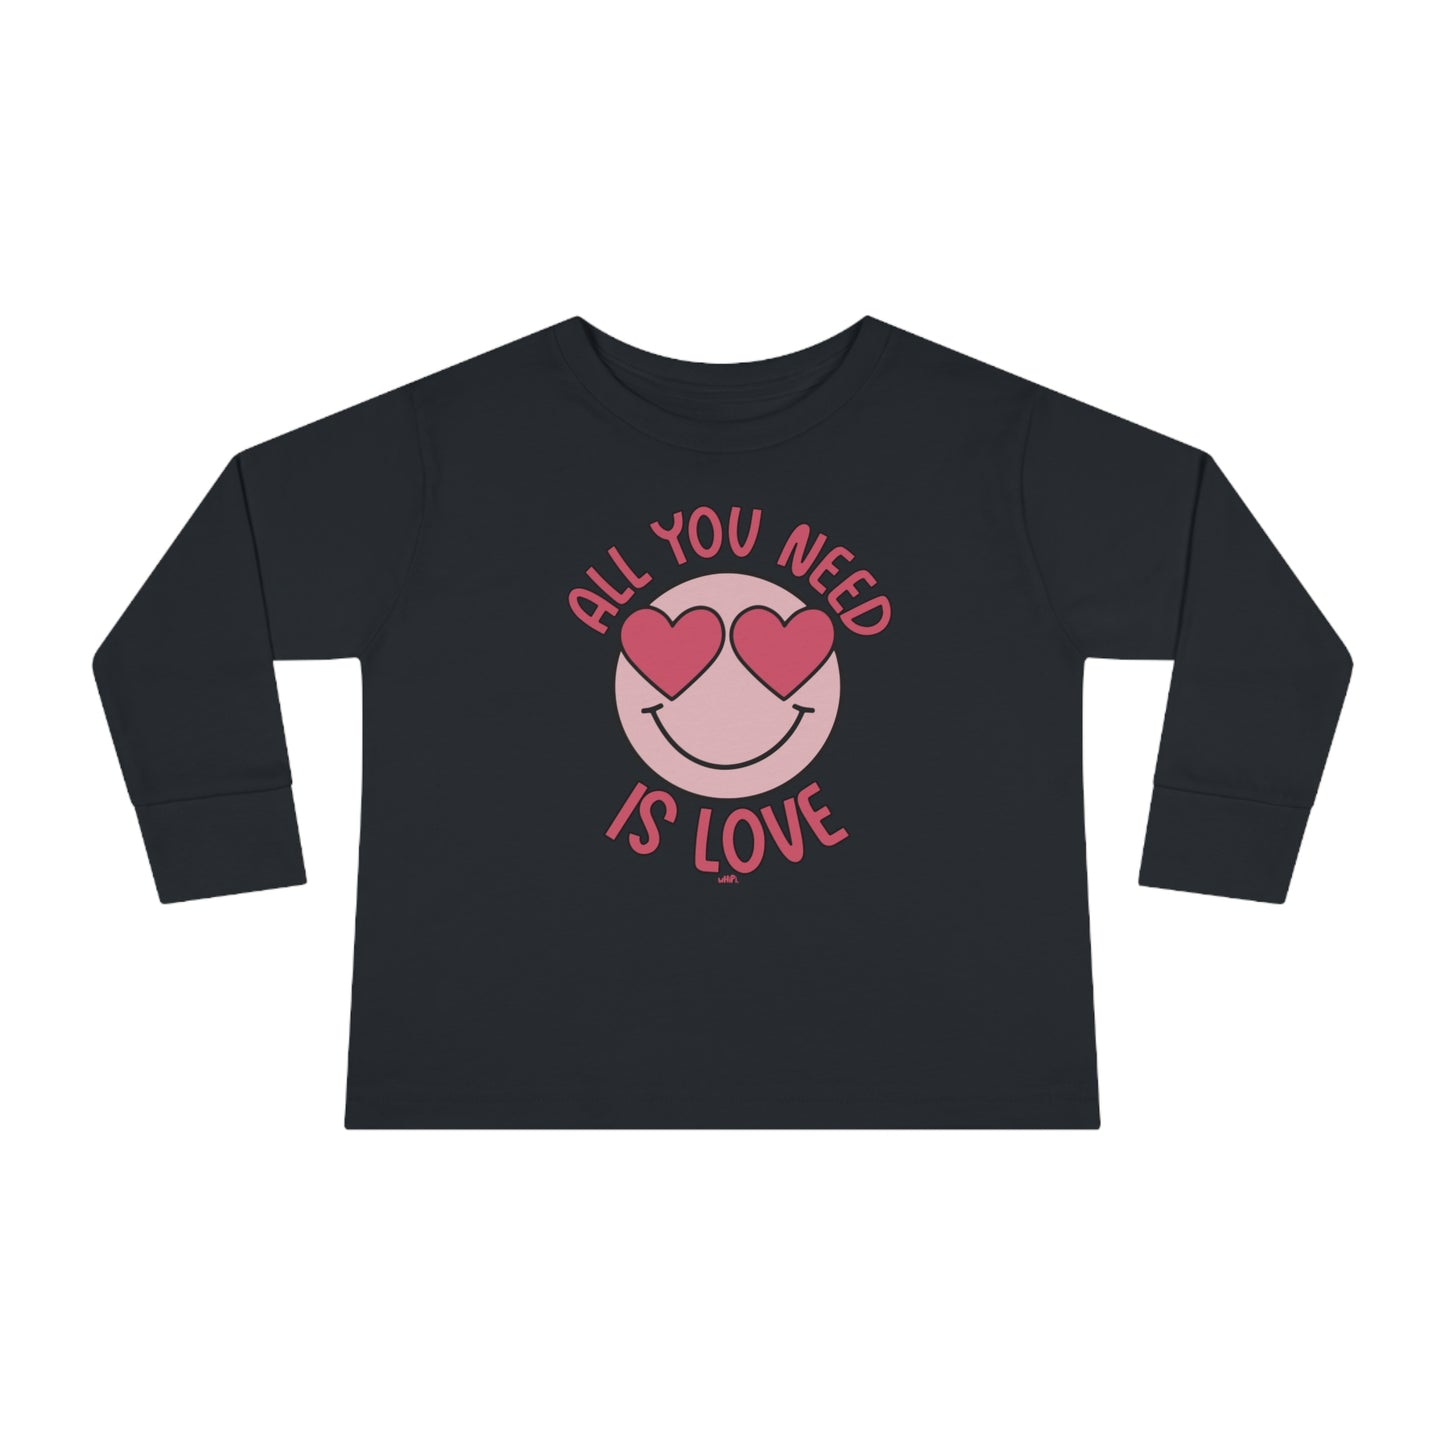 Toddler All You Need Is Love Long Sleeve Tee